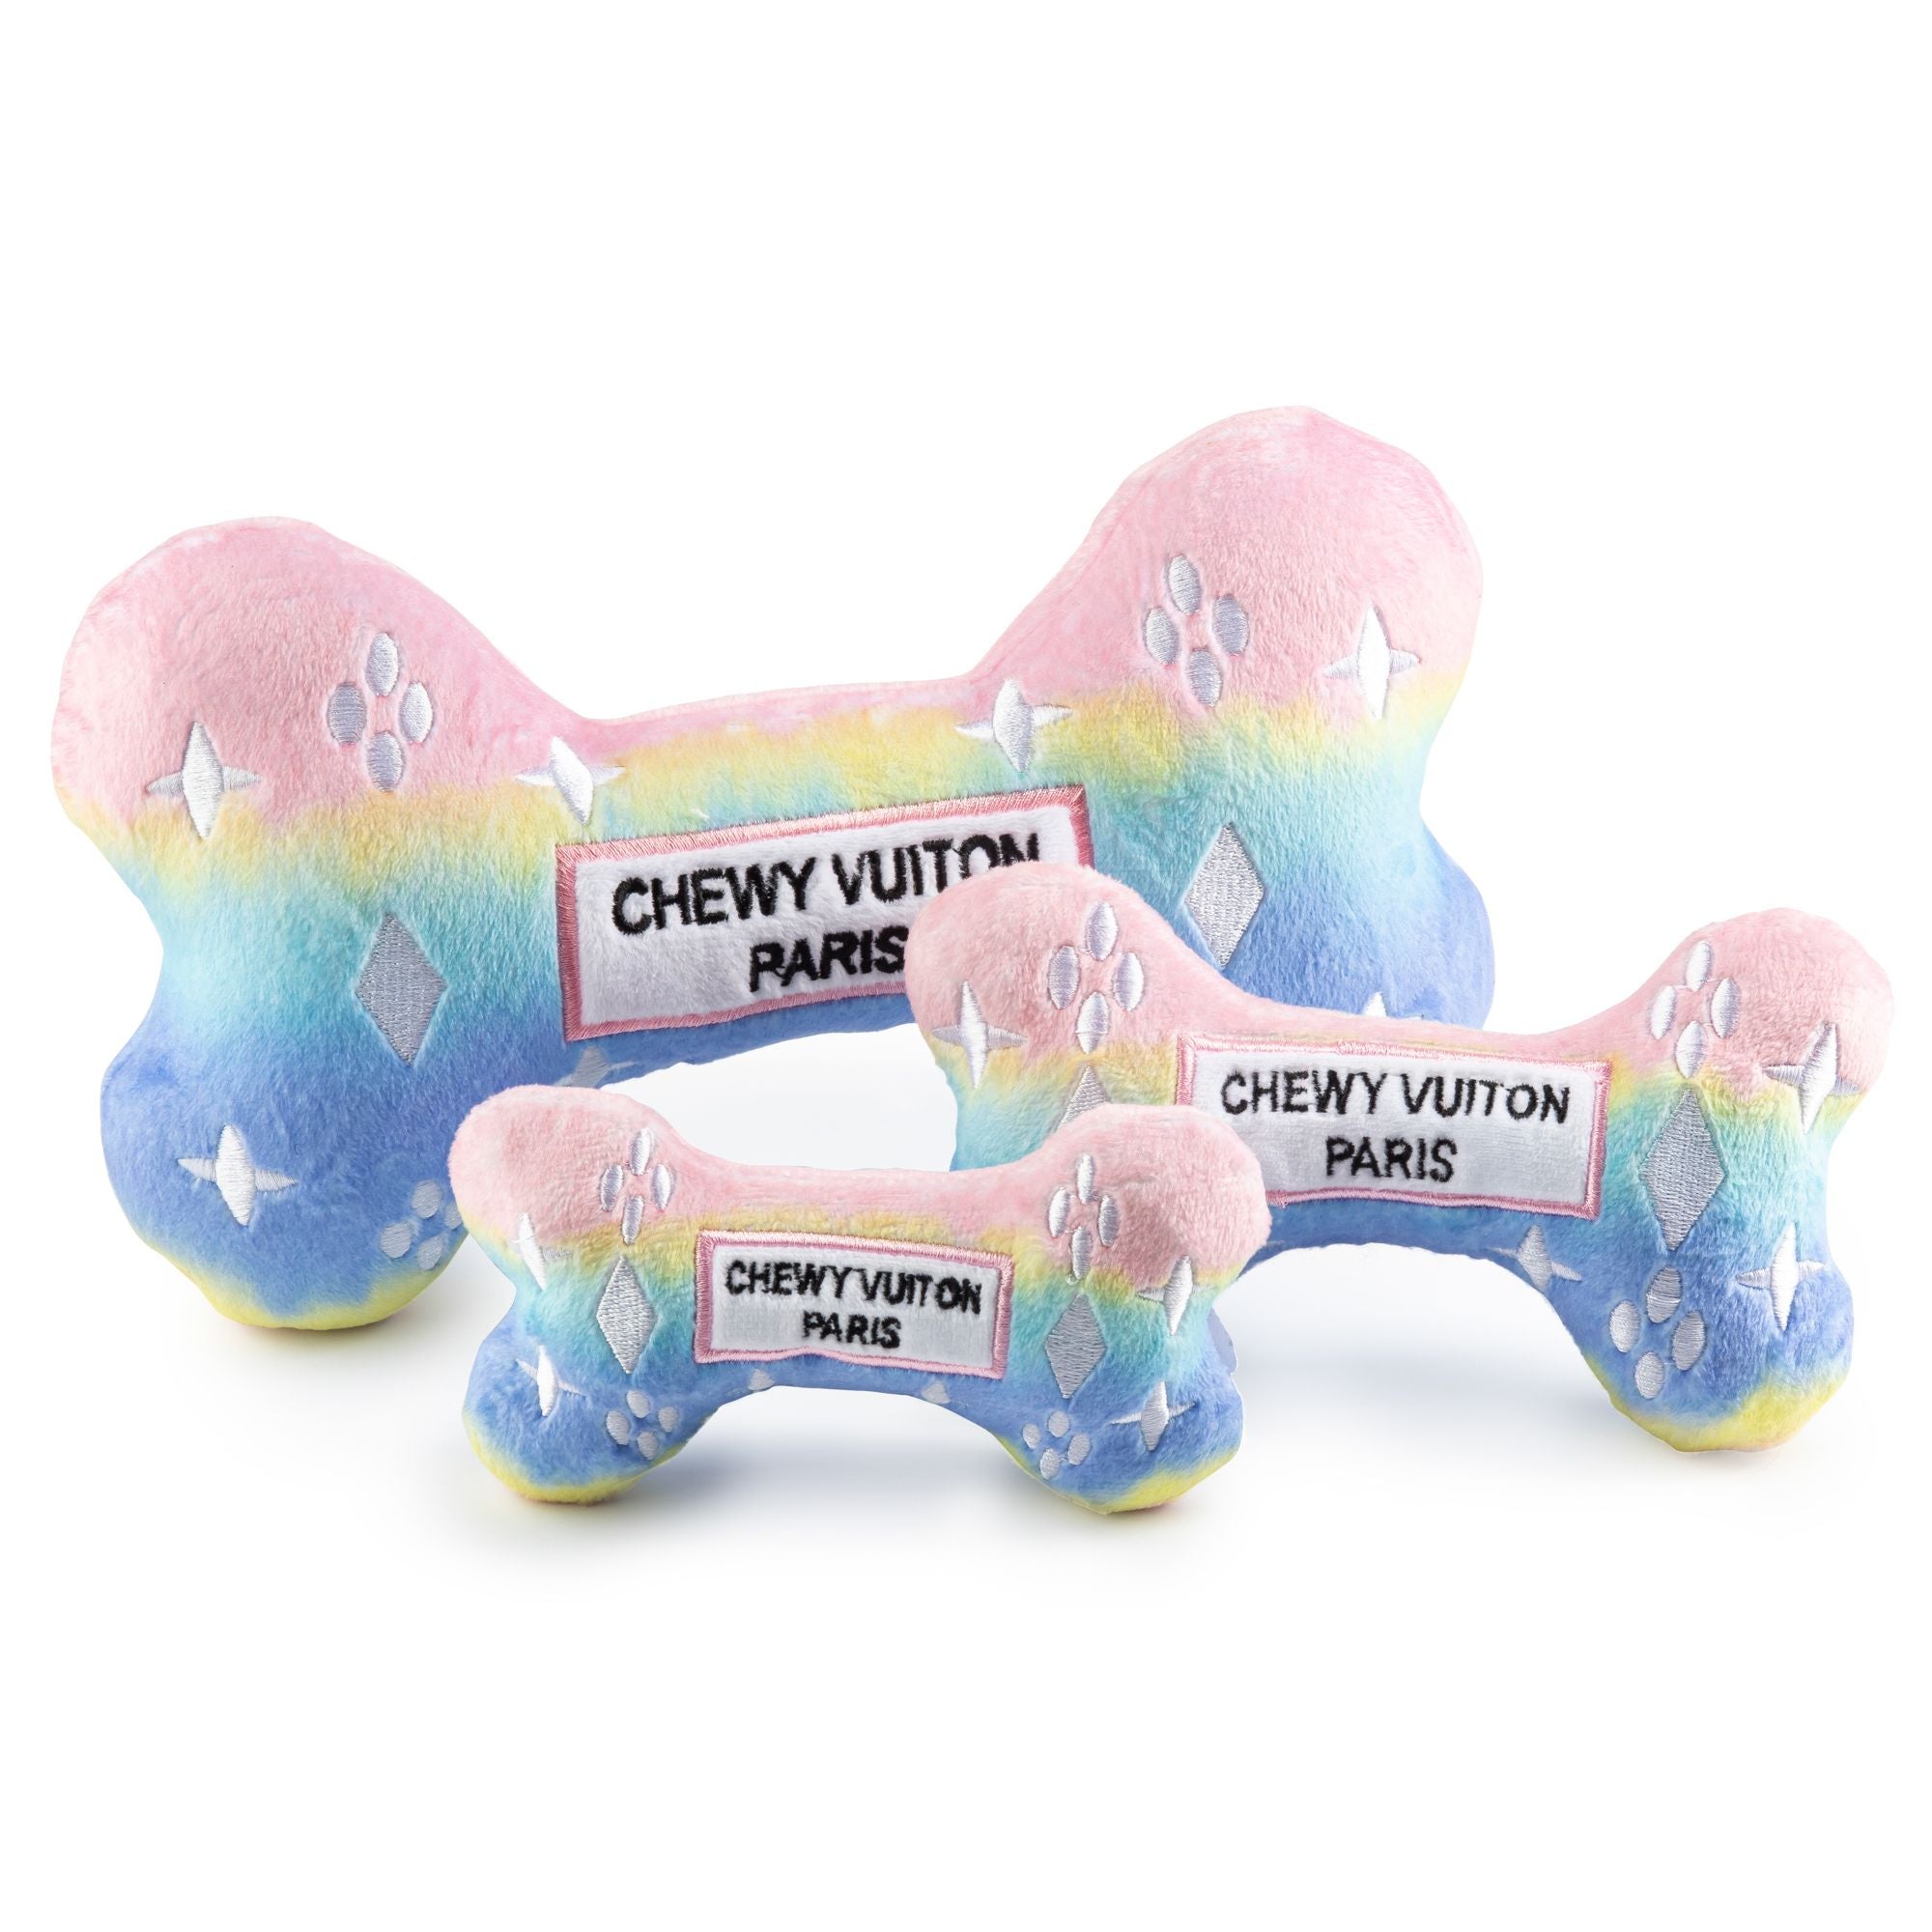 Chewy Vuiton Bone Toy in Pink Ombre